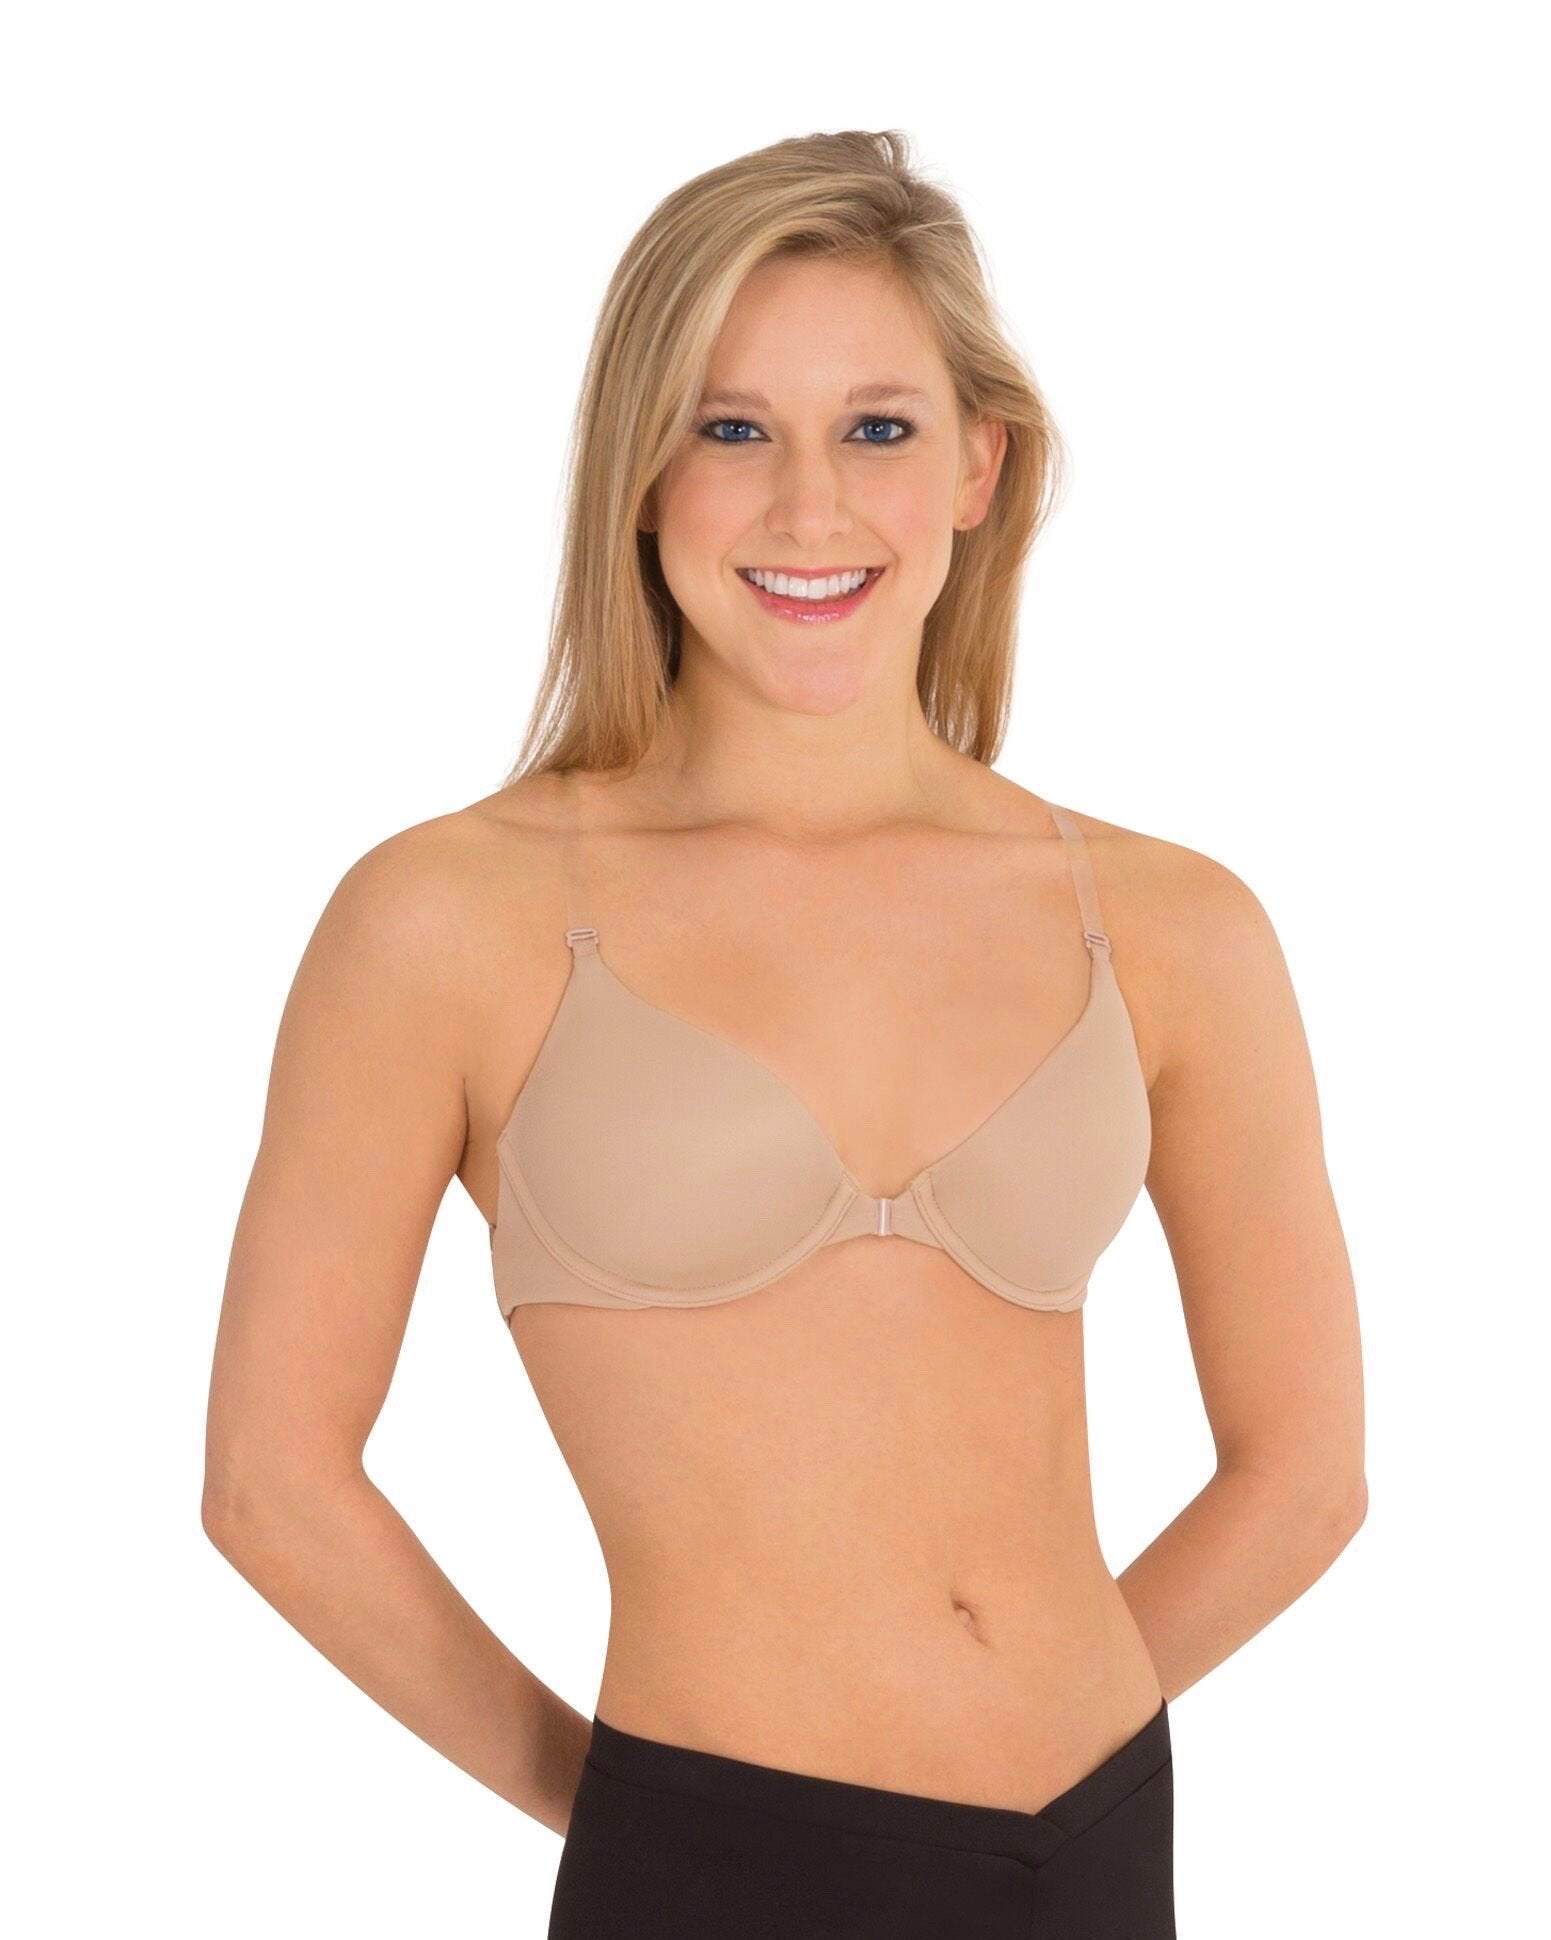 Clear Strap Nude Bras, Undergarments for Young Dancers - Shop in Canada